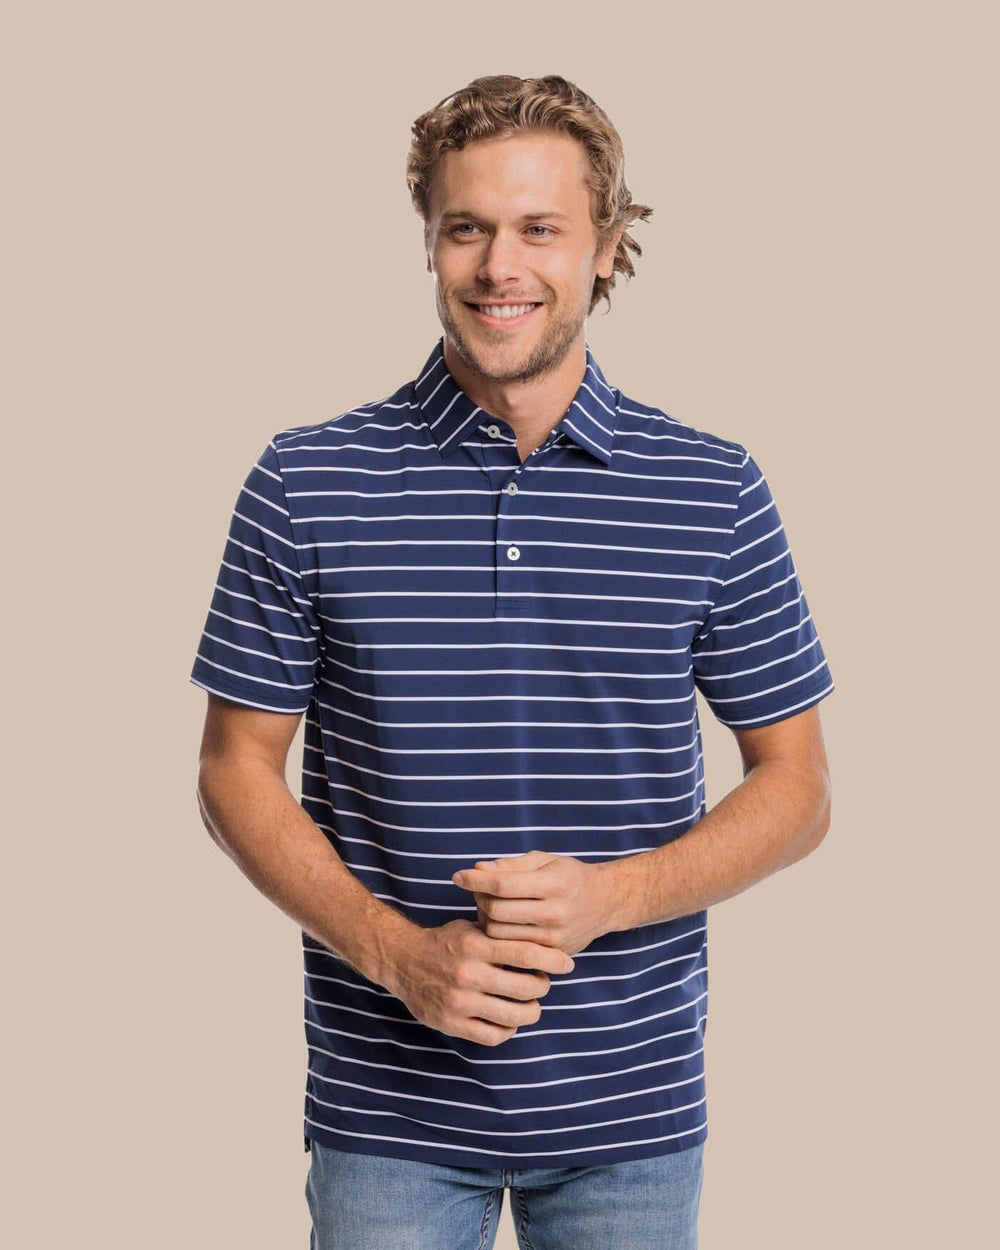 The front view of the Southern Tide brrr-eeze Desmond Stripe Performance Polo by Southern Tide - Navy